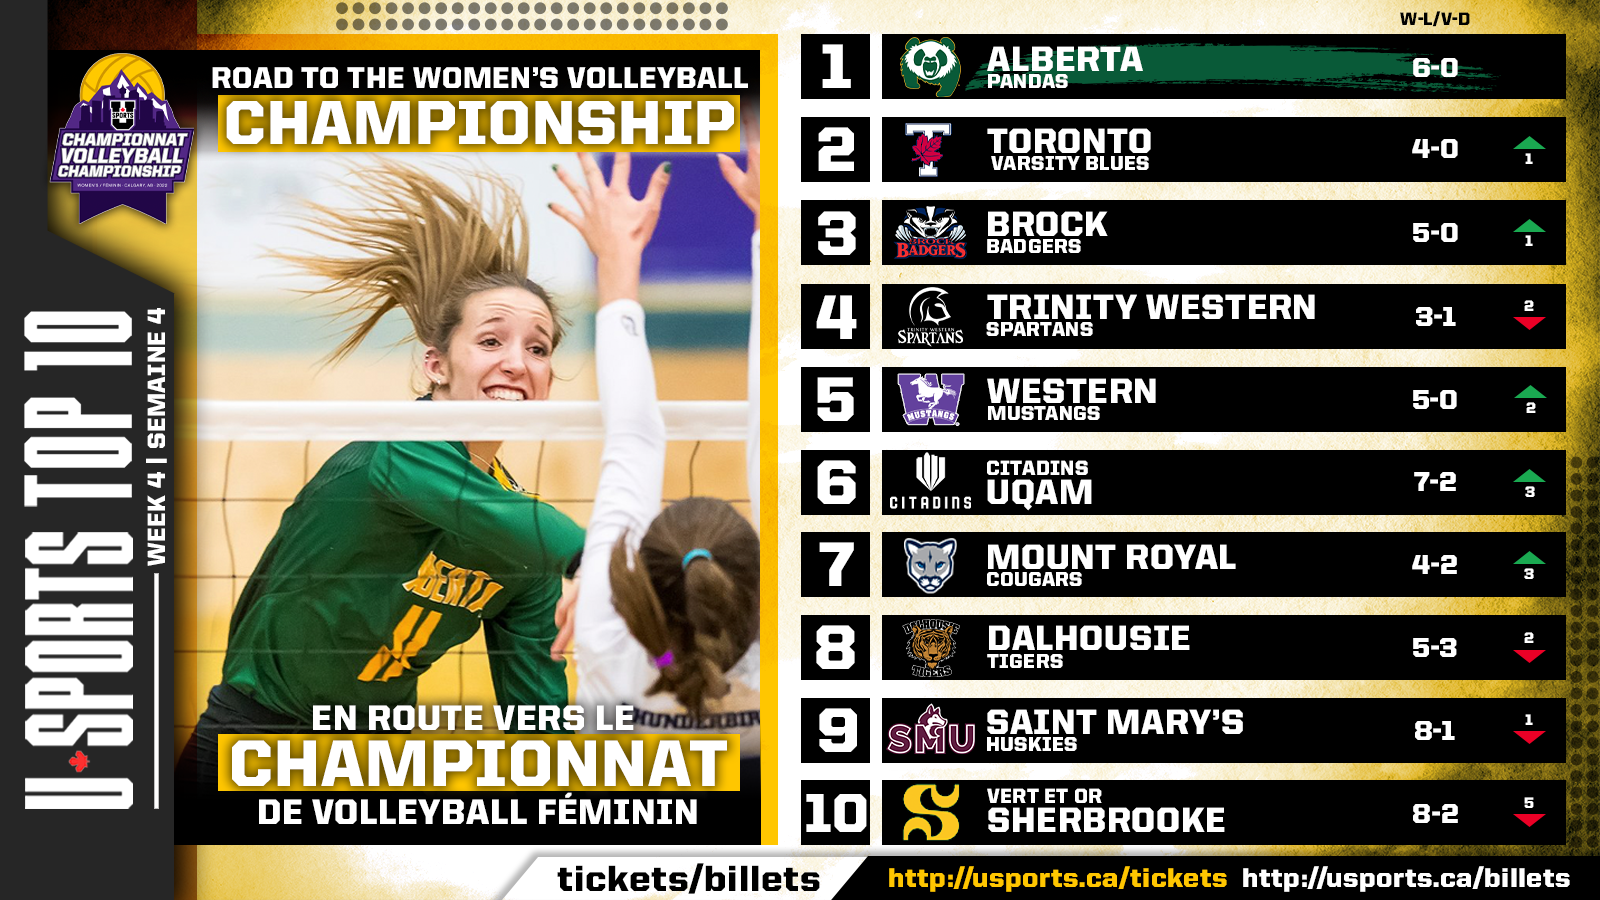 TOP_10_WVBALL_WK4.png (1.14 MB)